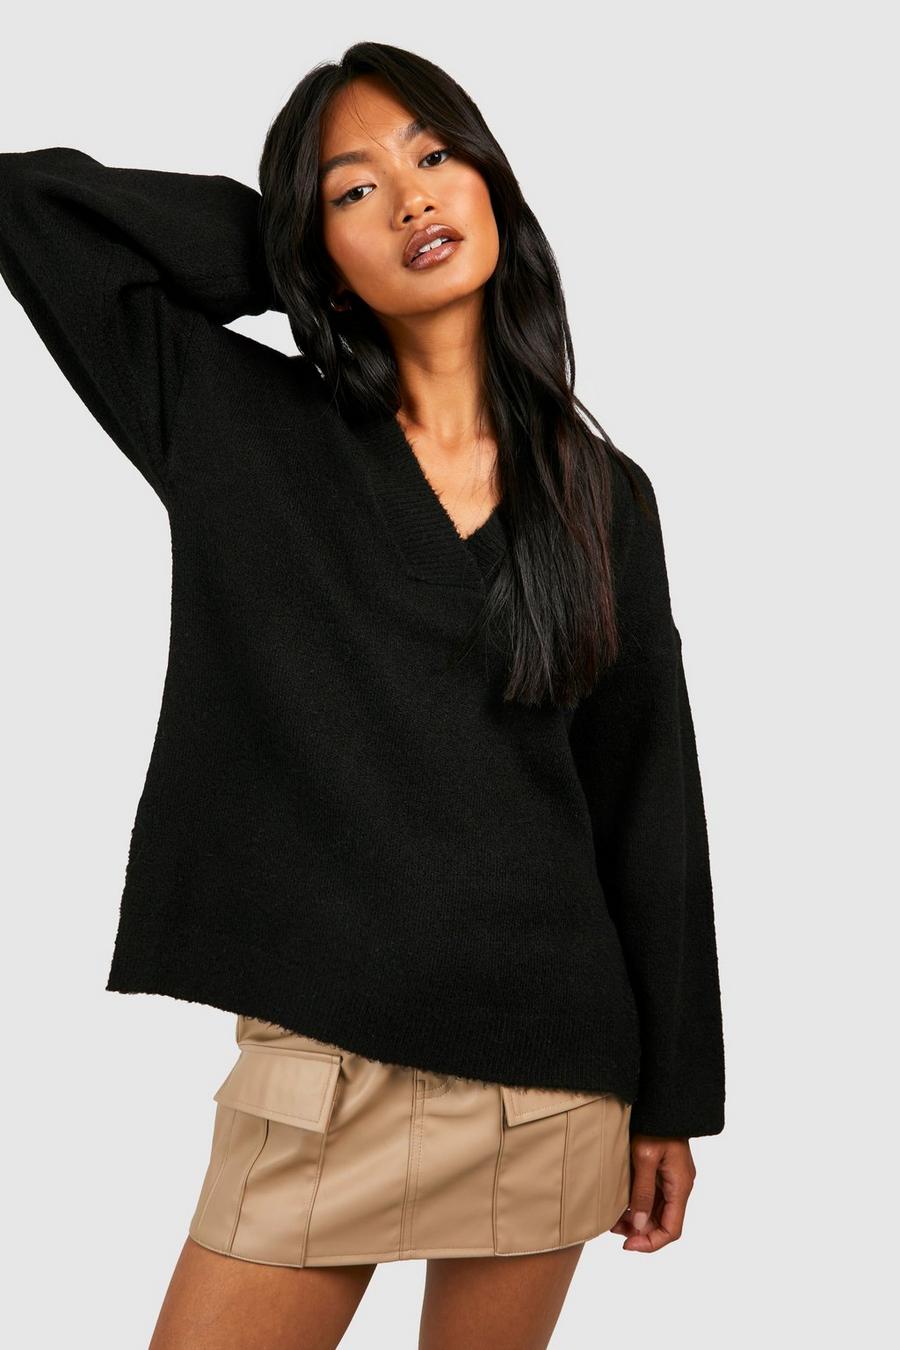 Black Soft Knit Slouchy Sweater